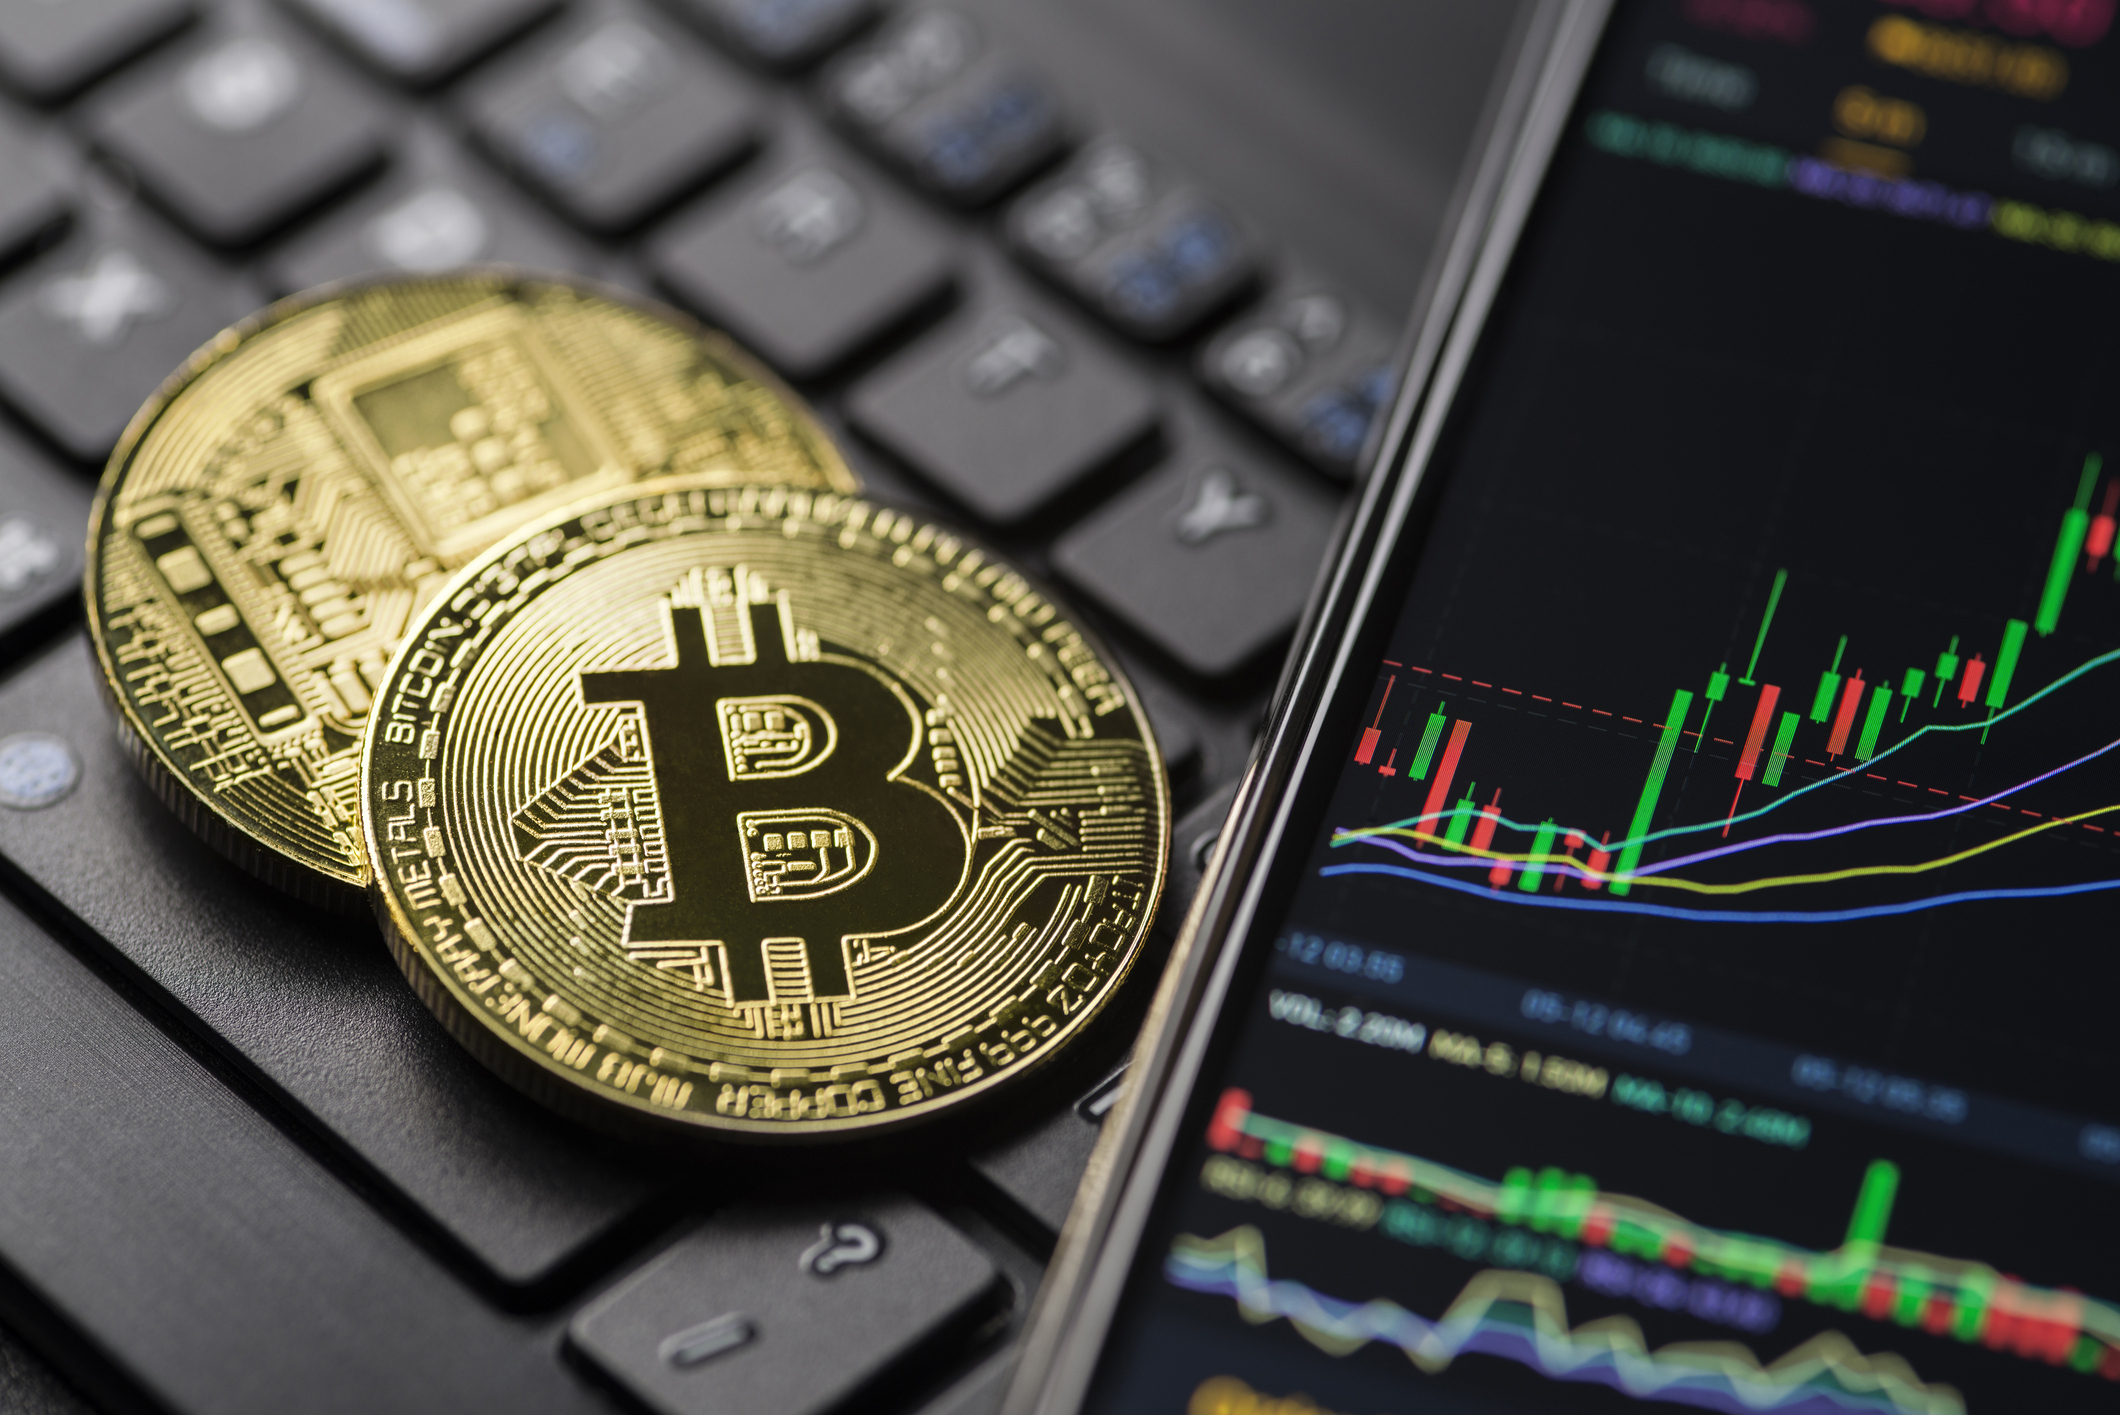 Bitcoin Suffers Massive Drop On BitMEX, Is The Rally Over?